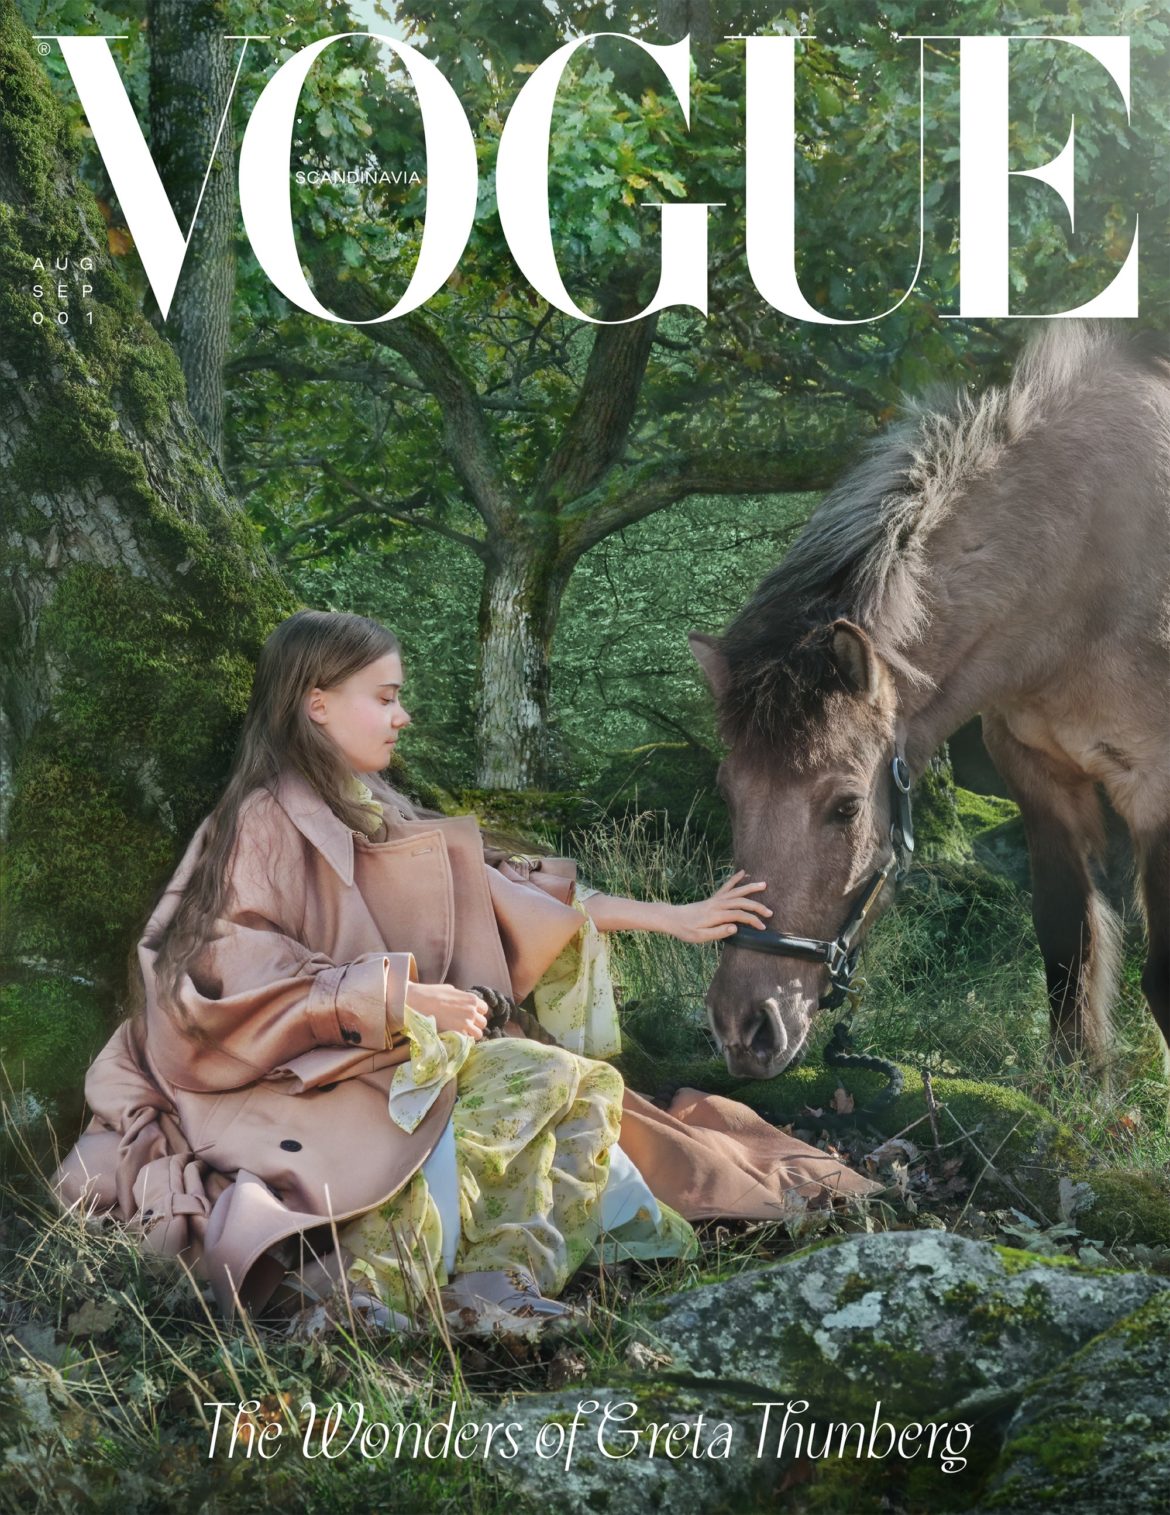 Vogue Scandinavia on Greta Thunberg, sustainability and their new cover